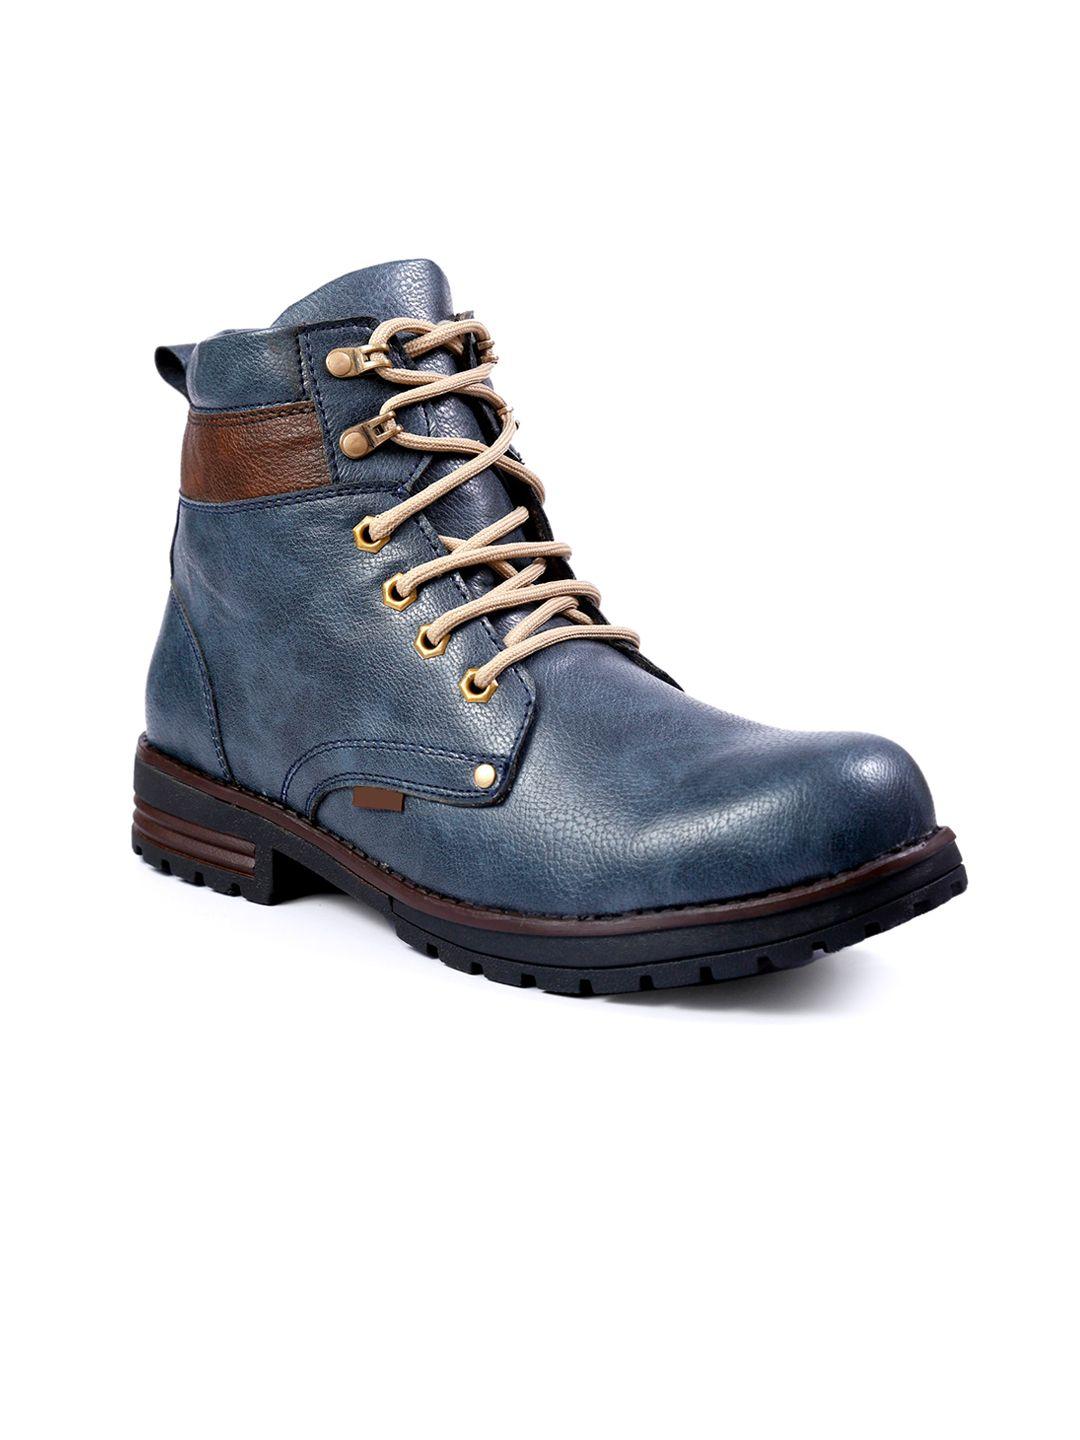 woakers men round toe mid-top lace-ups boots